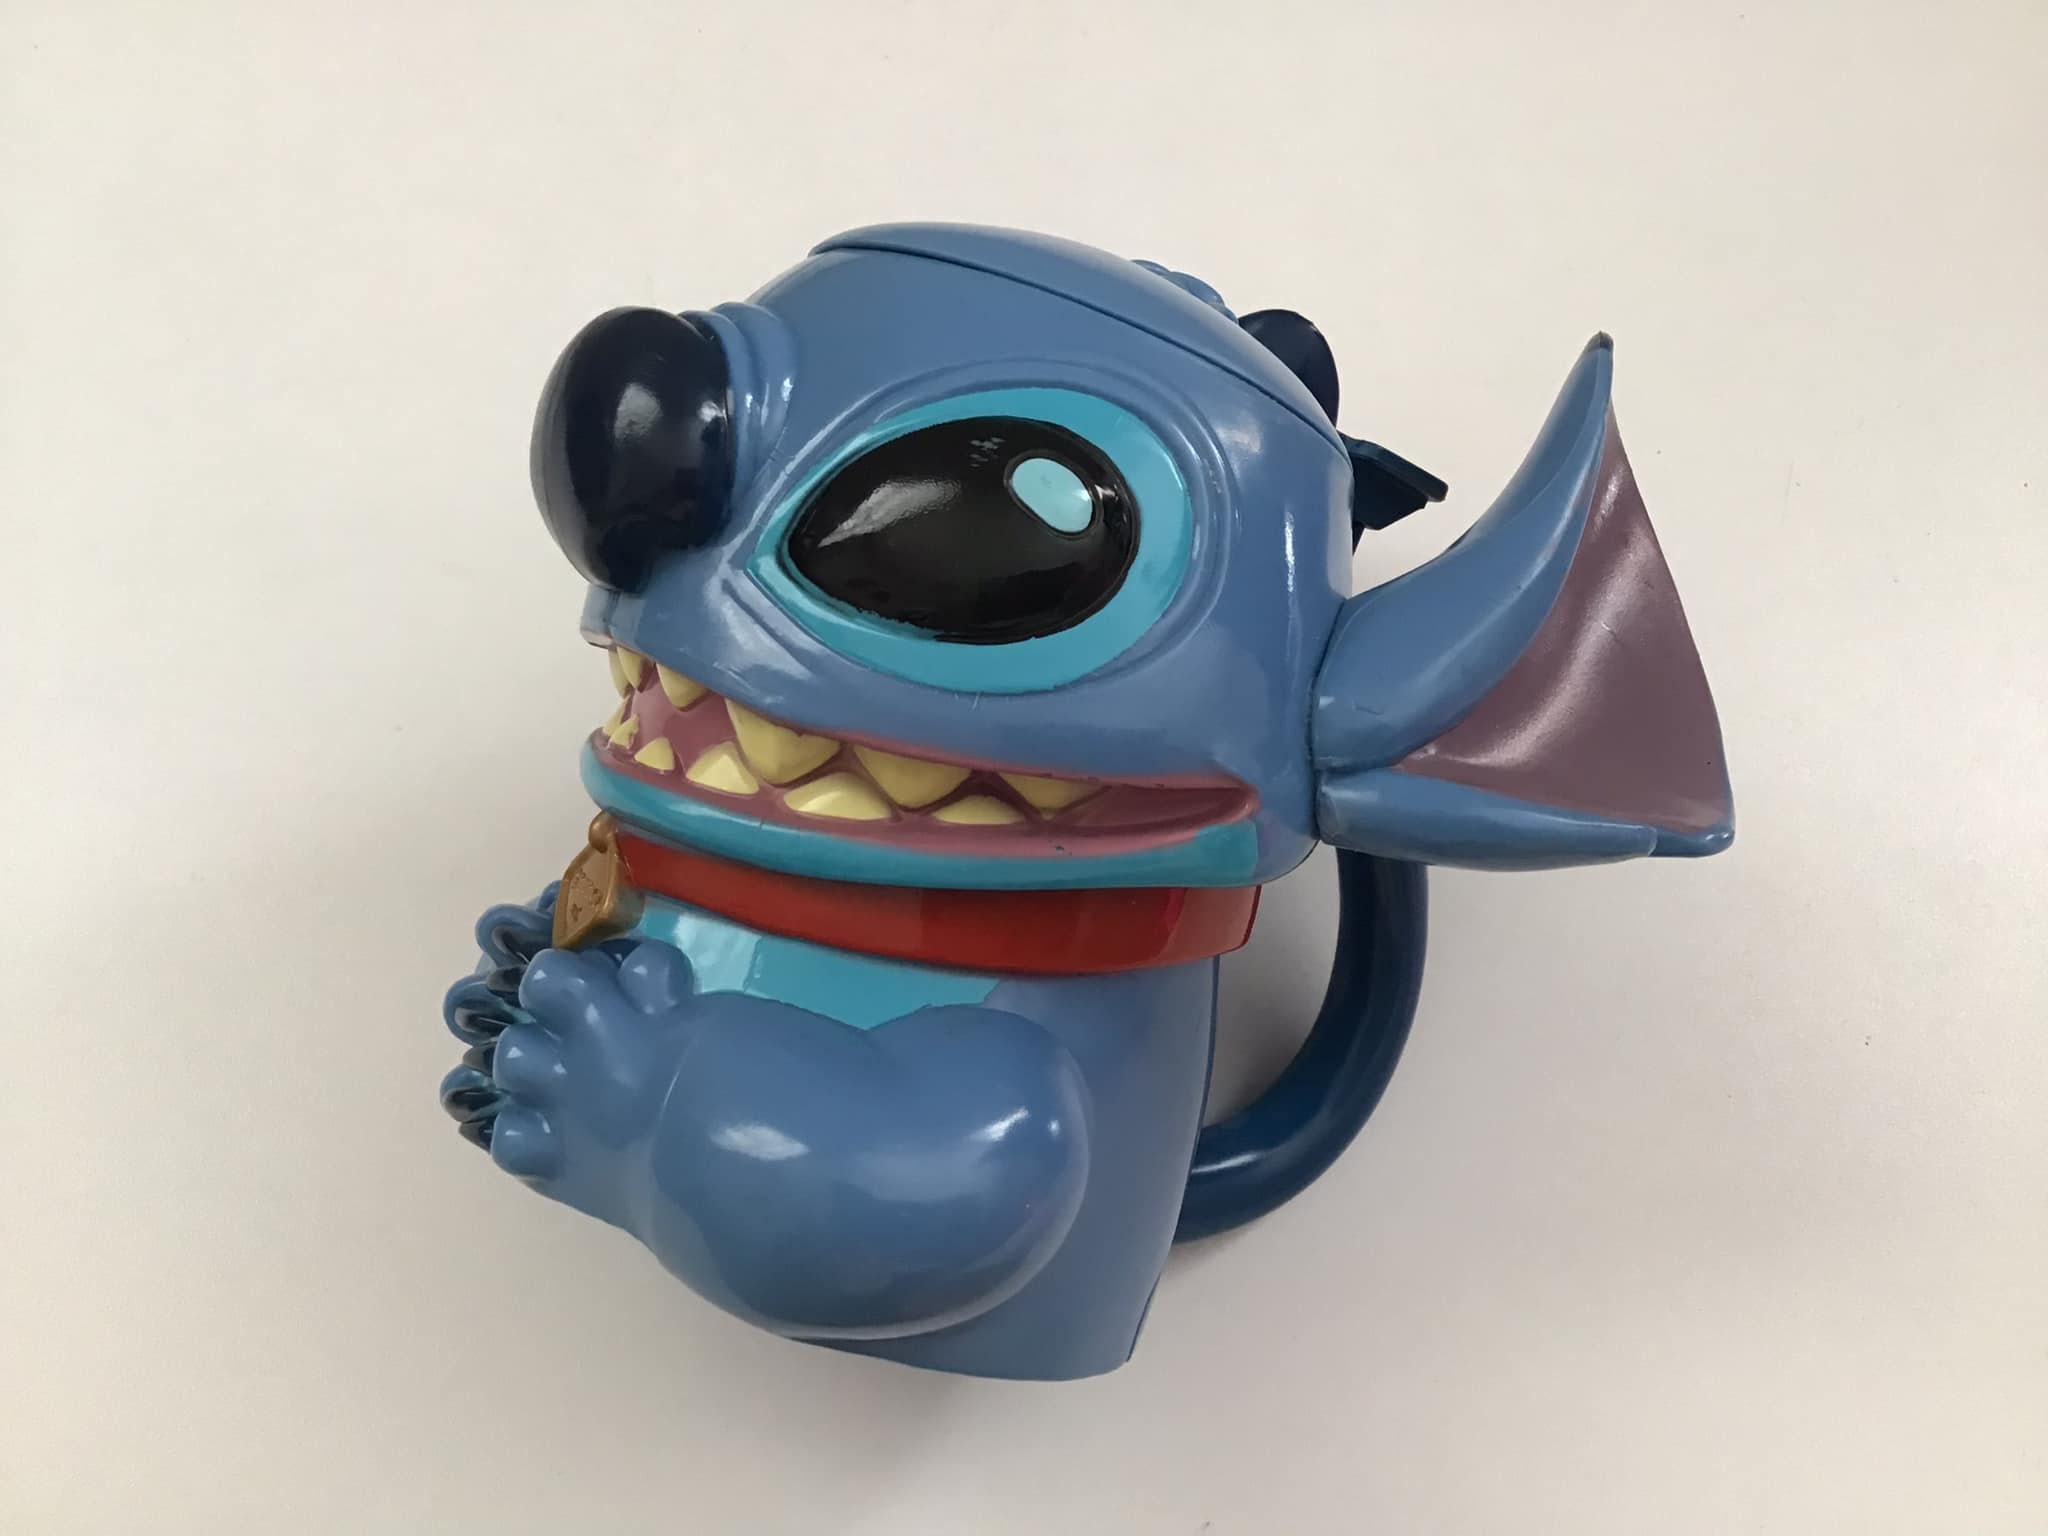 Disney Is Selling A Stitch Mug Complete With A Spoon and It Is Adorable